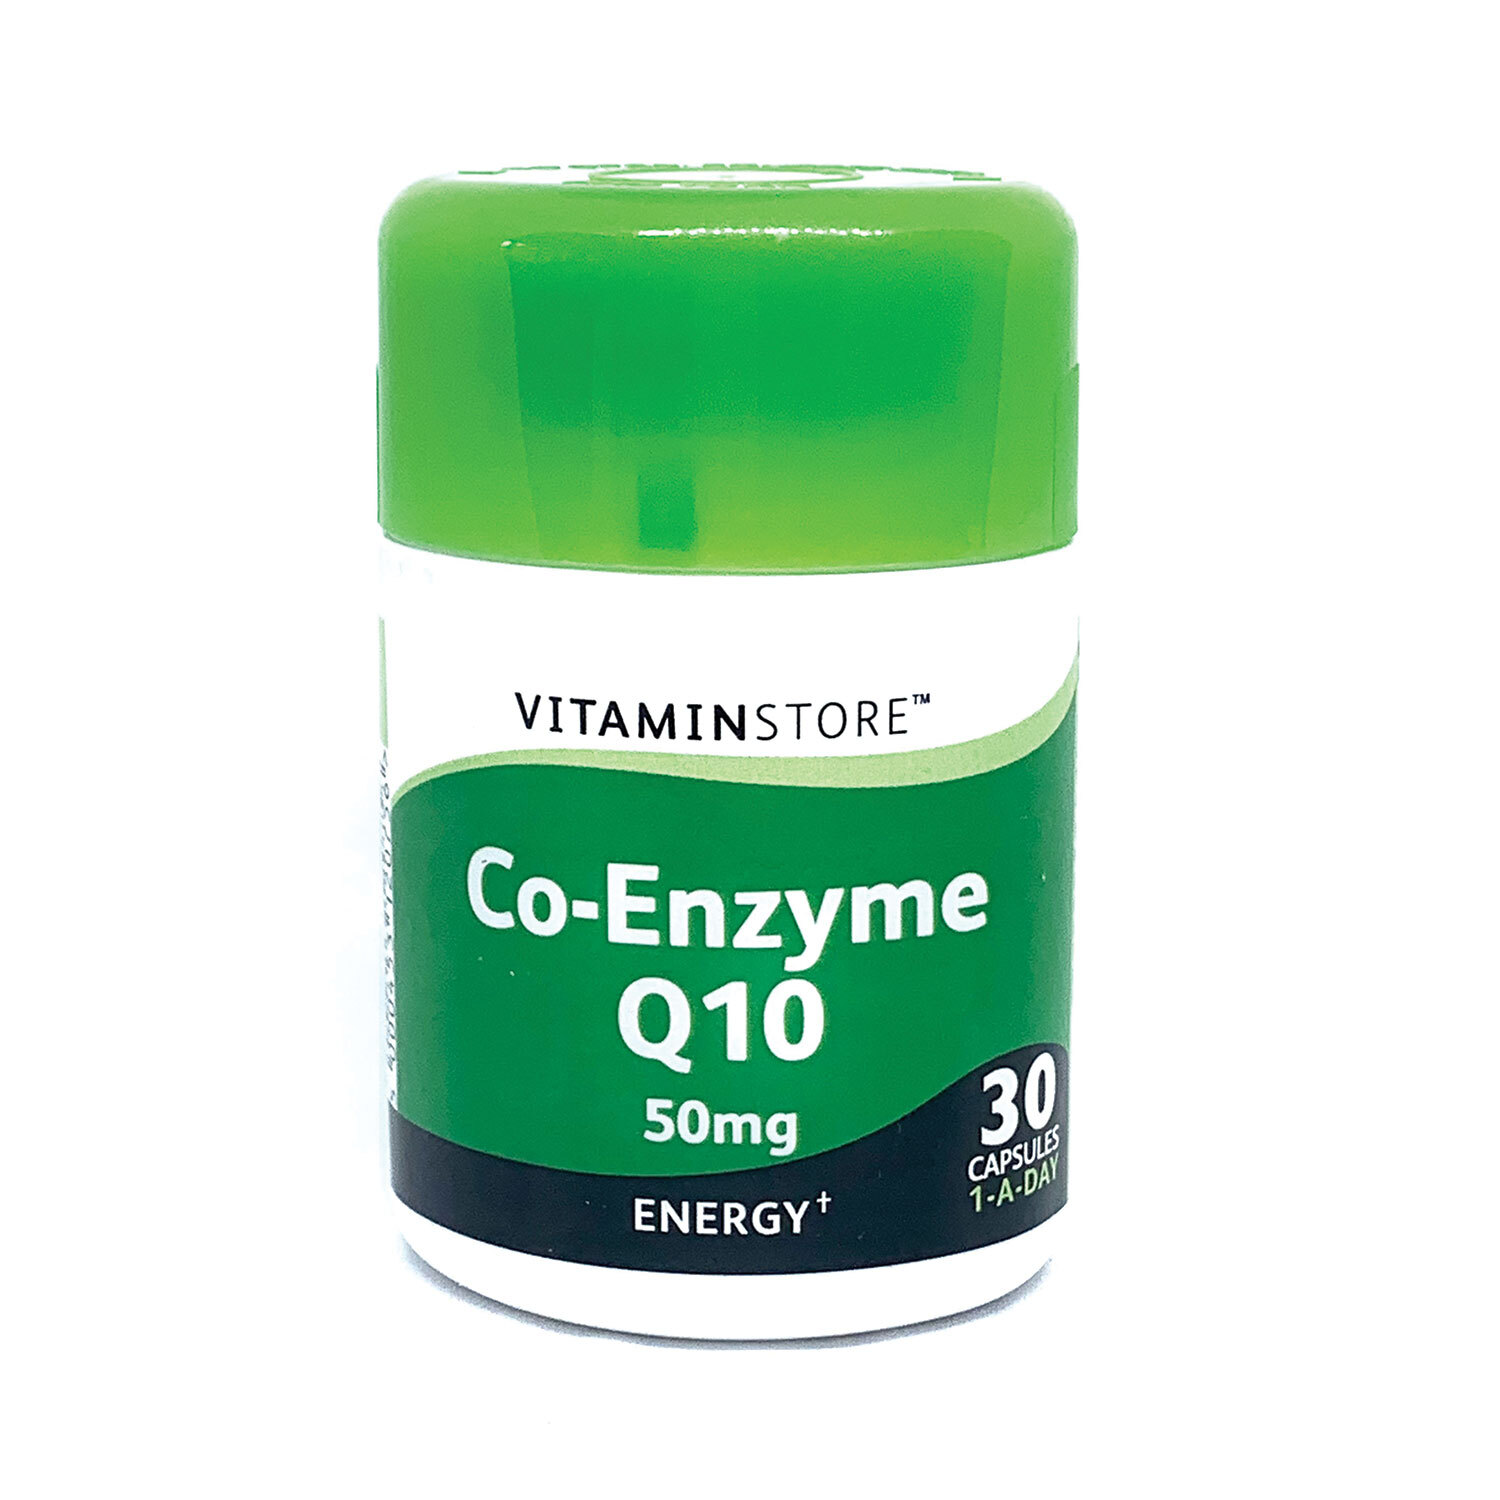 Co-Enzyme Q10 Tablets Image